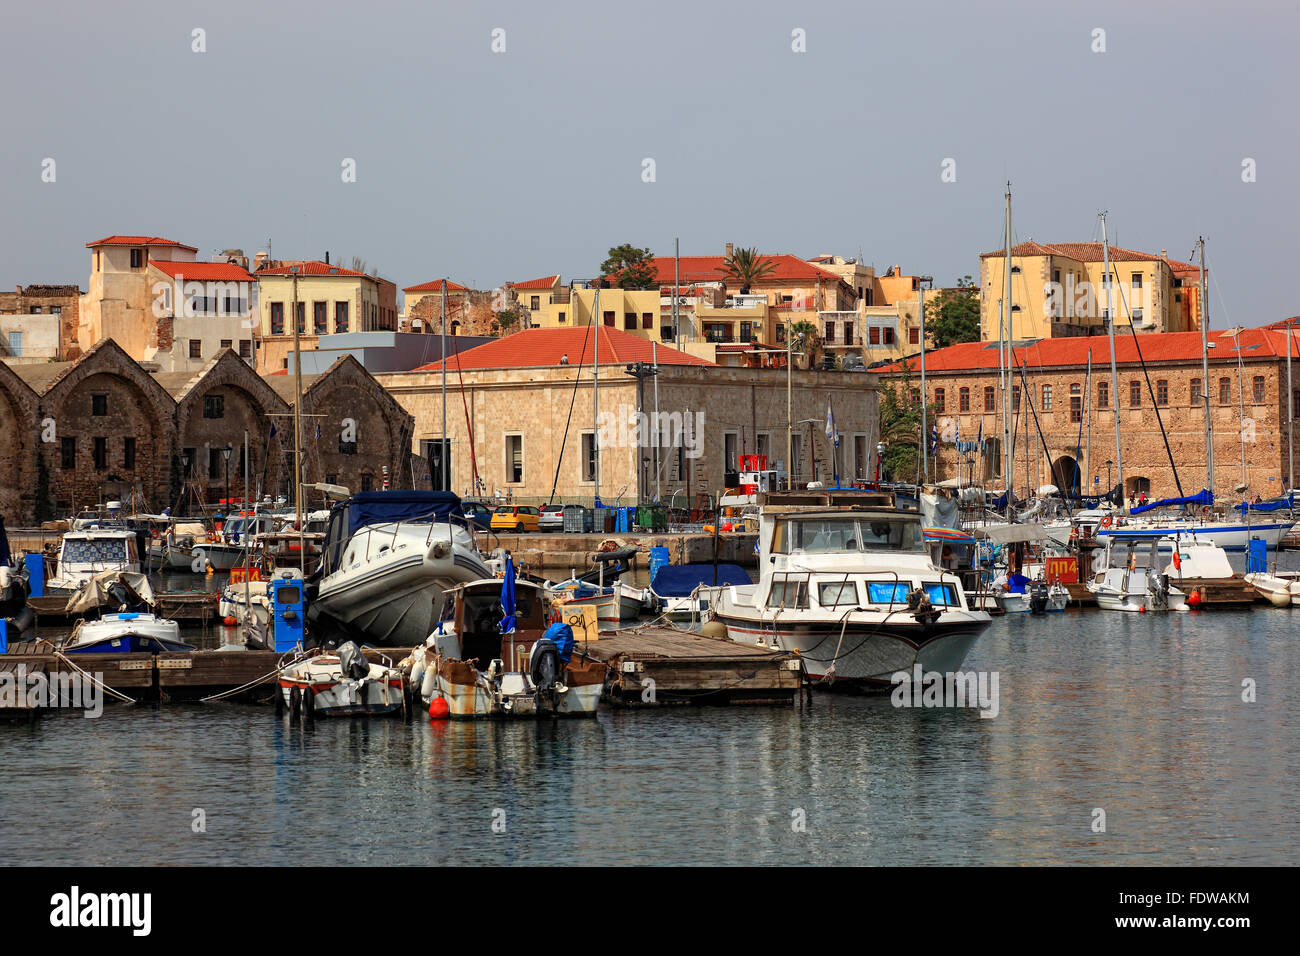 Crete, port Chania, Old Town, boats in the Venetian harbour Stock Photo